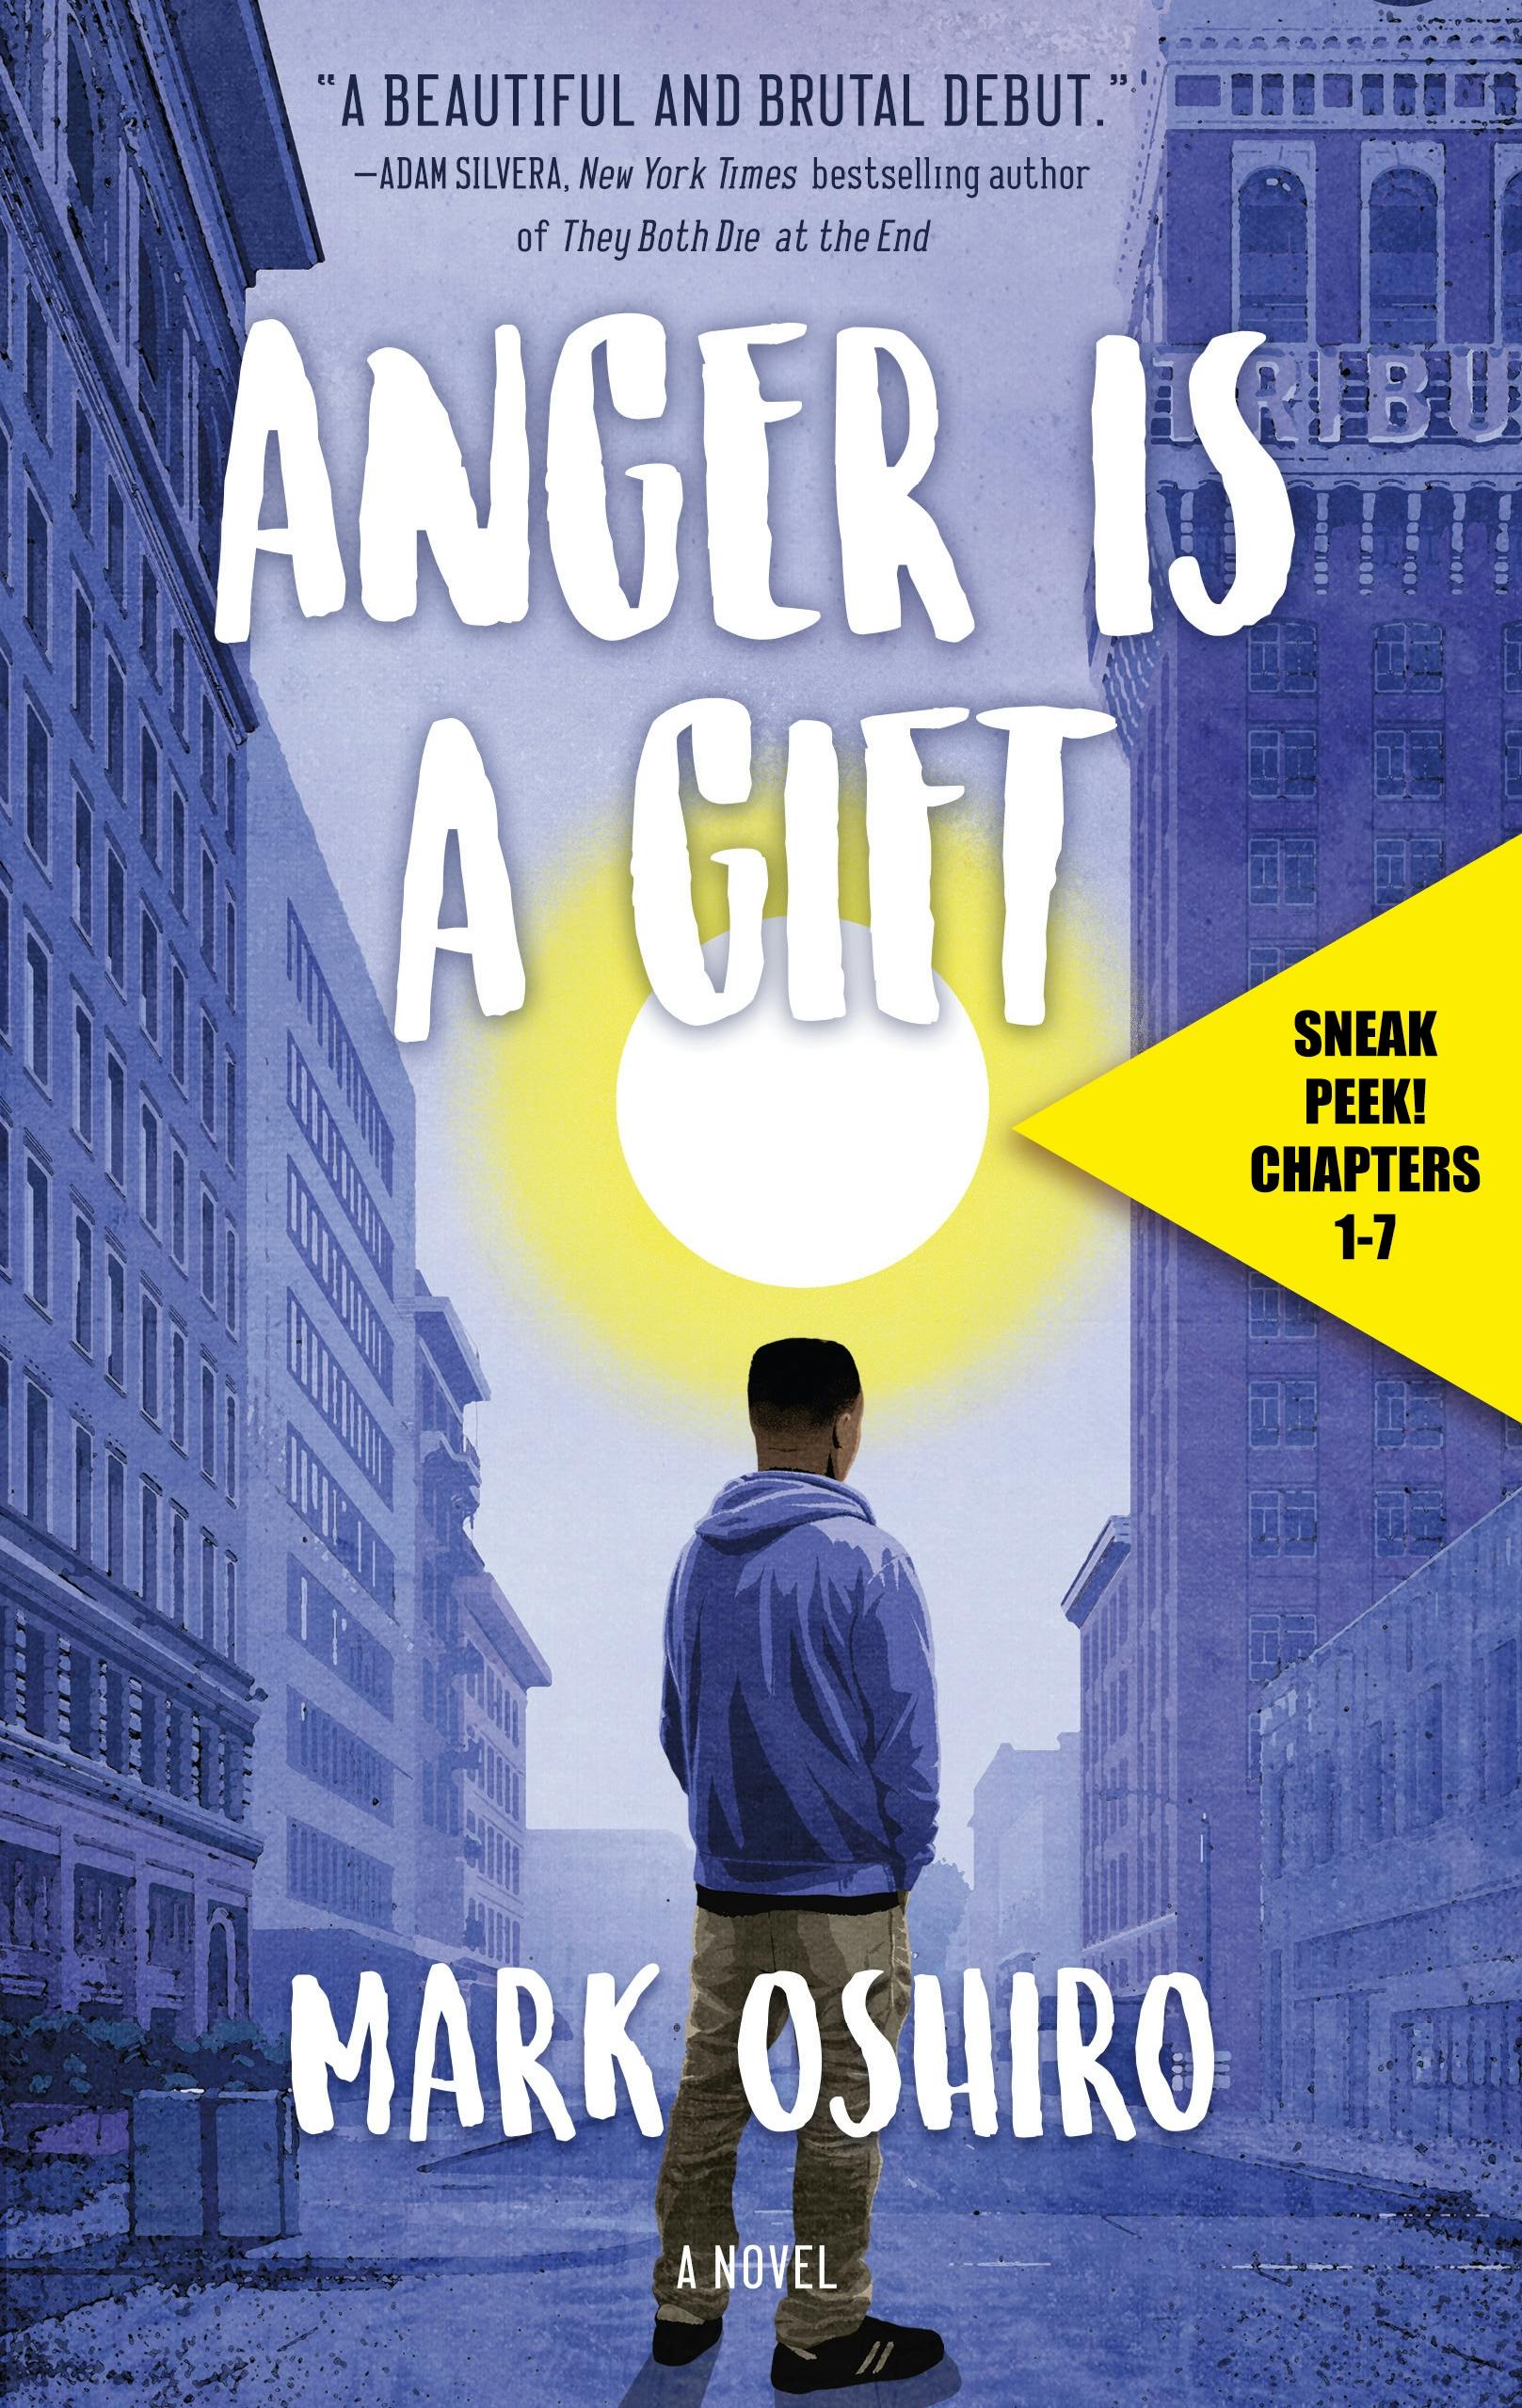 Cover for the book titled as: Anger Is a Gift Sneak Peek